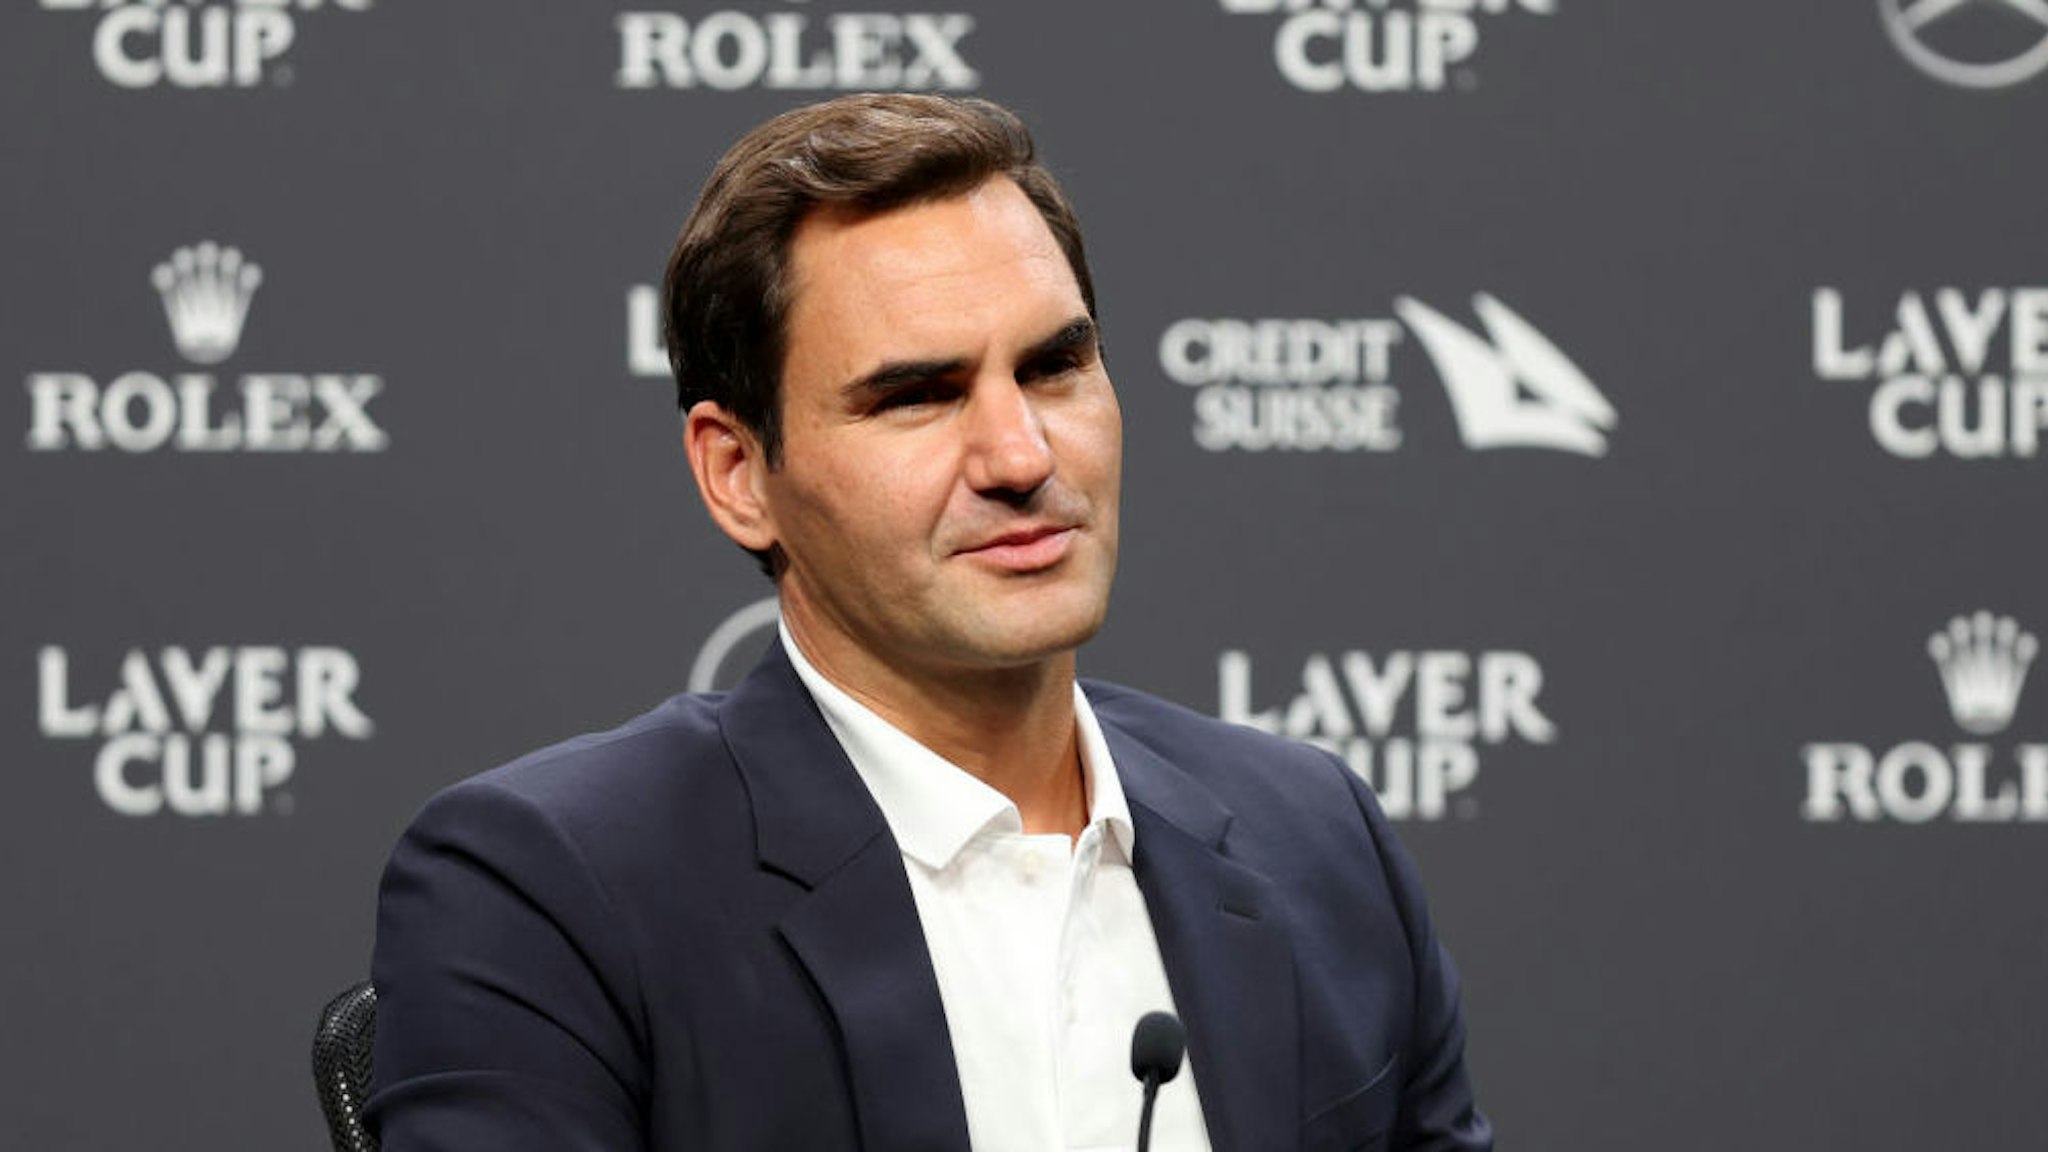 LONDON, ENGLAND - SEPTEMBER 21: Roger Federer of Team Europe talks to the media during a press conference ahead of the Laver Cup at The O2 Arena on September 21, 2022 in London, England.